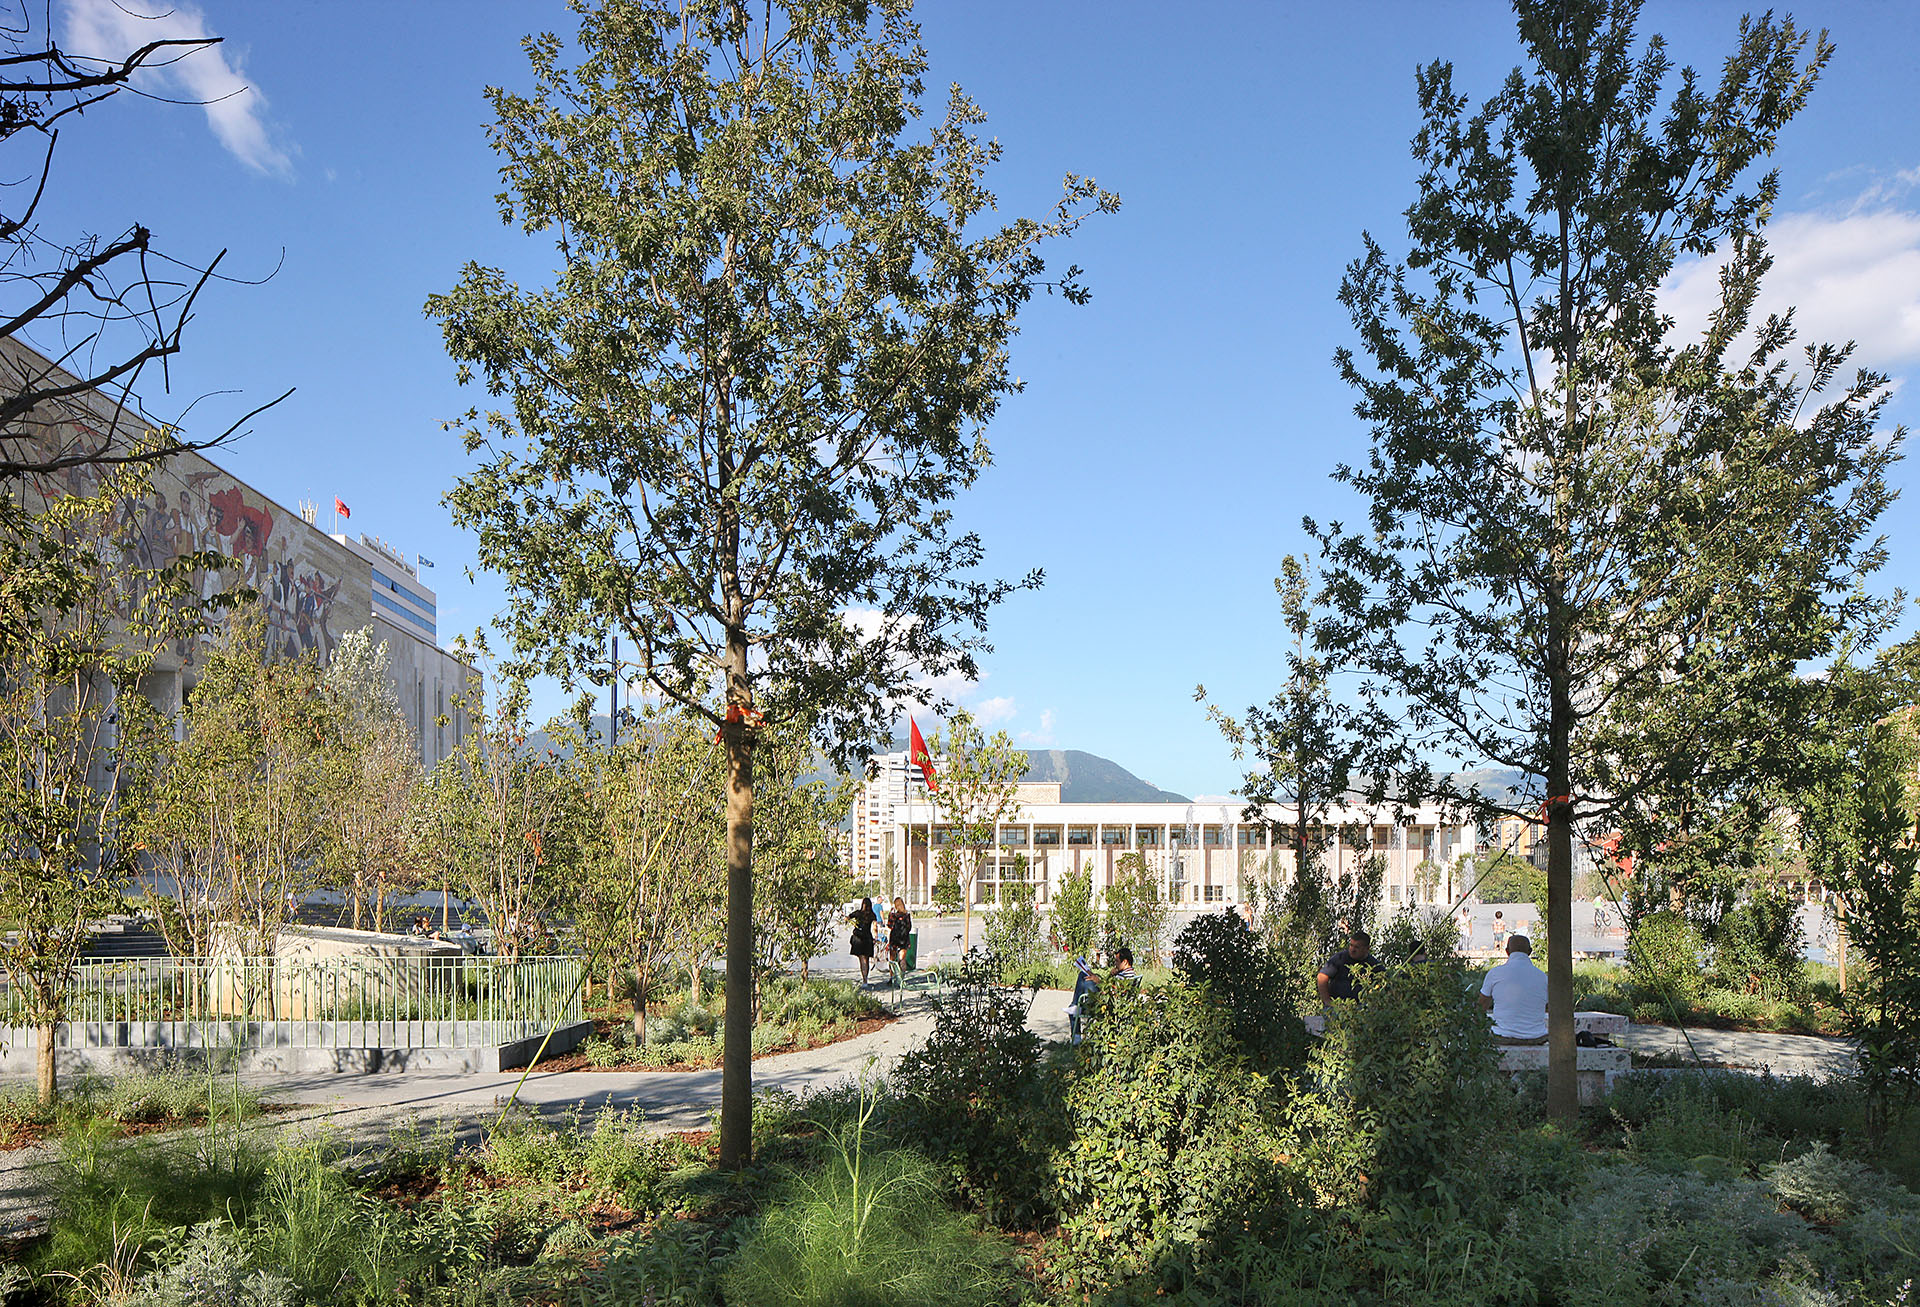 <p>&nbsp;The gardens were designed for public and semi-public functions that spread into and animate the central square; water elements and fountains contribute additional animation to the lively urban plaza.</p>